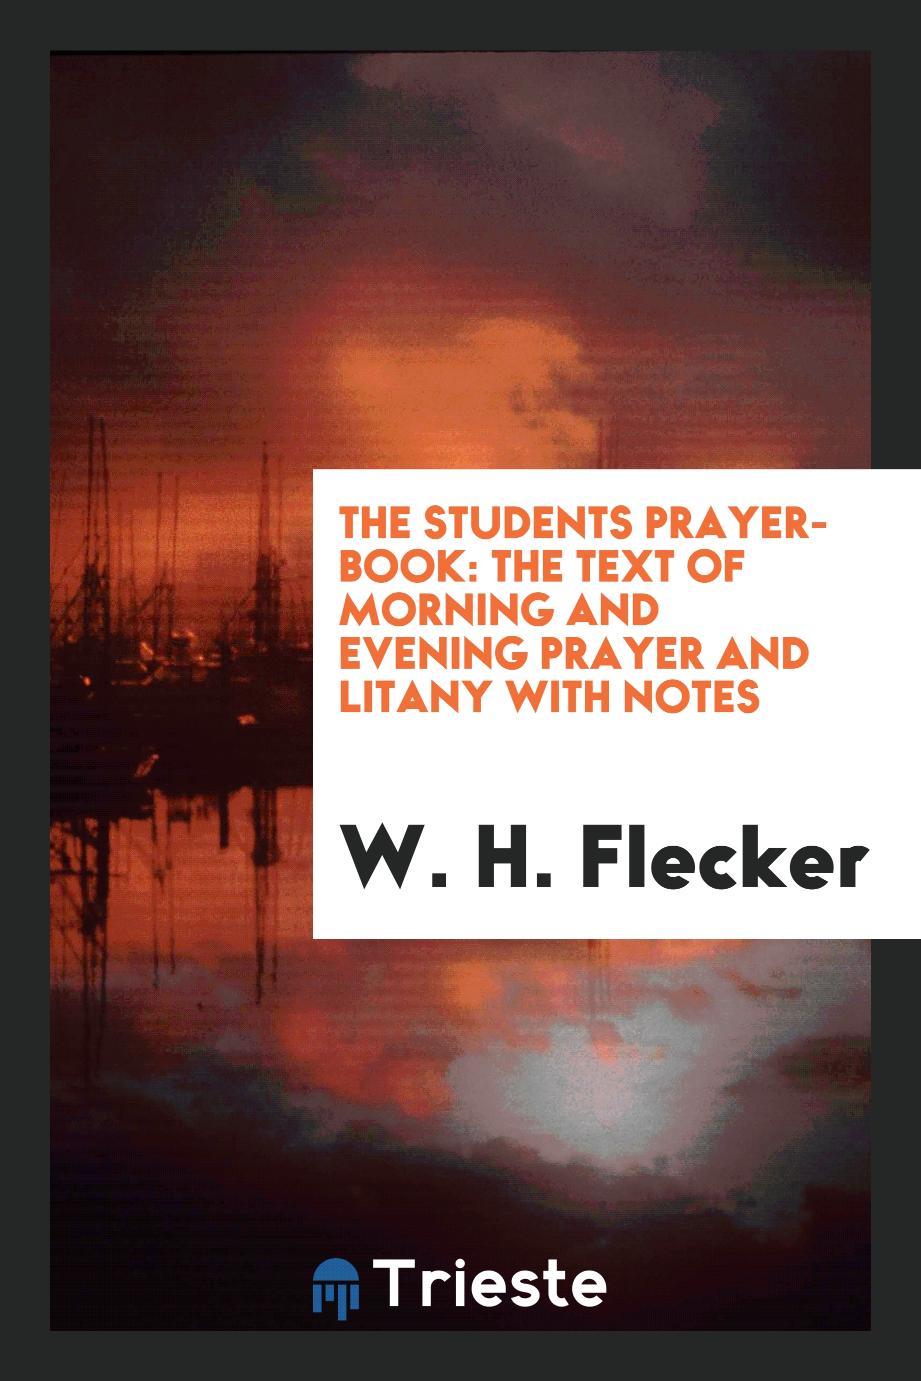 The students prayer-book: the text of morning and evening prayer and litany with notes